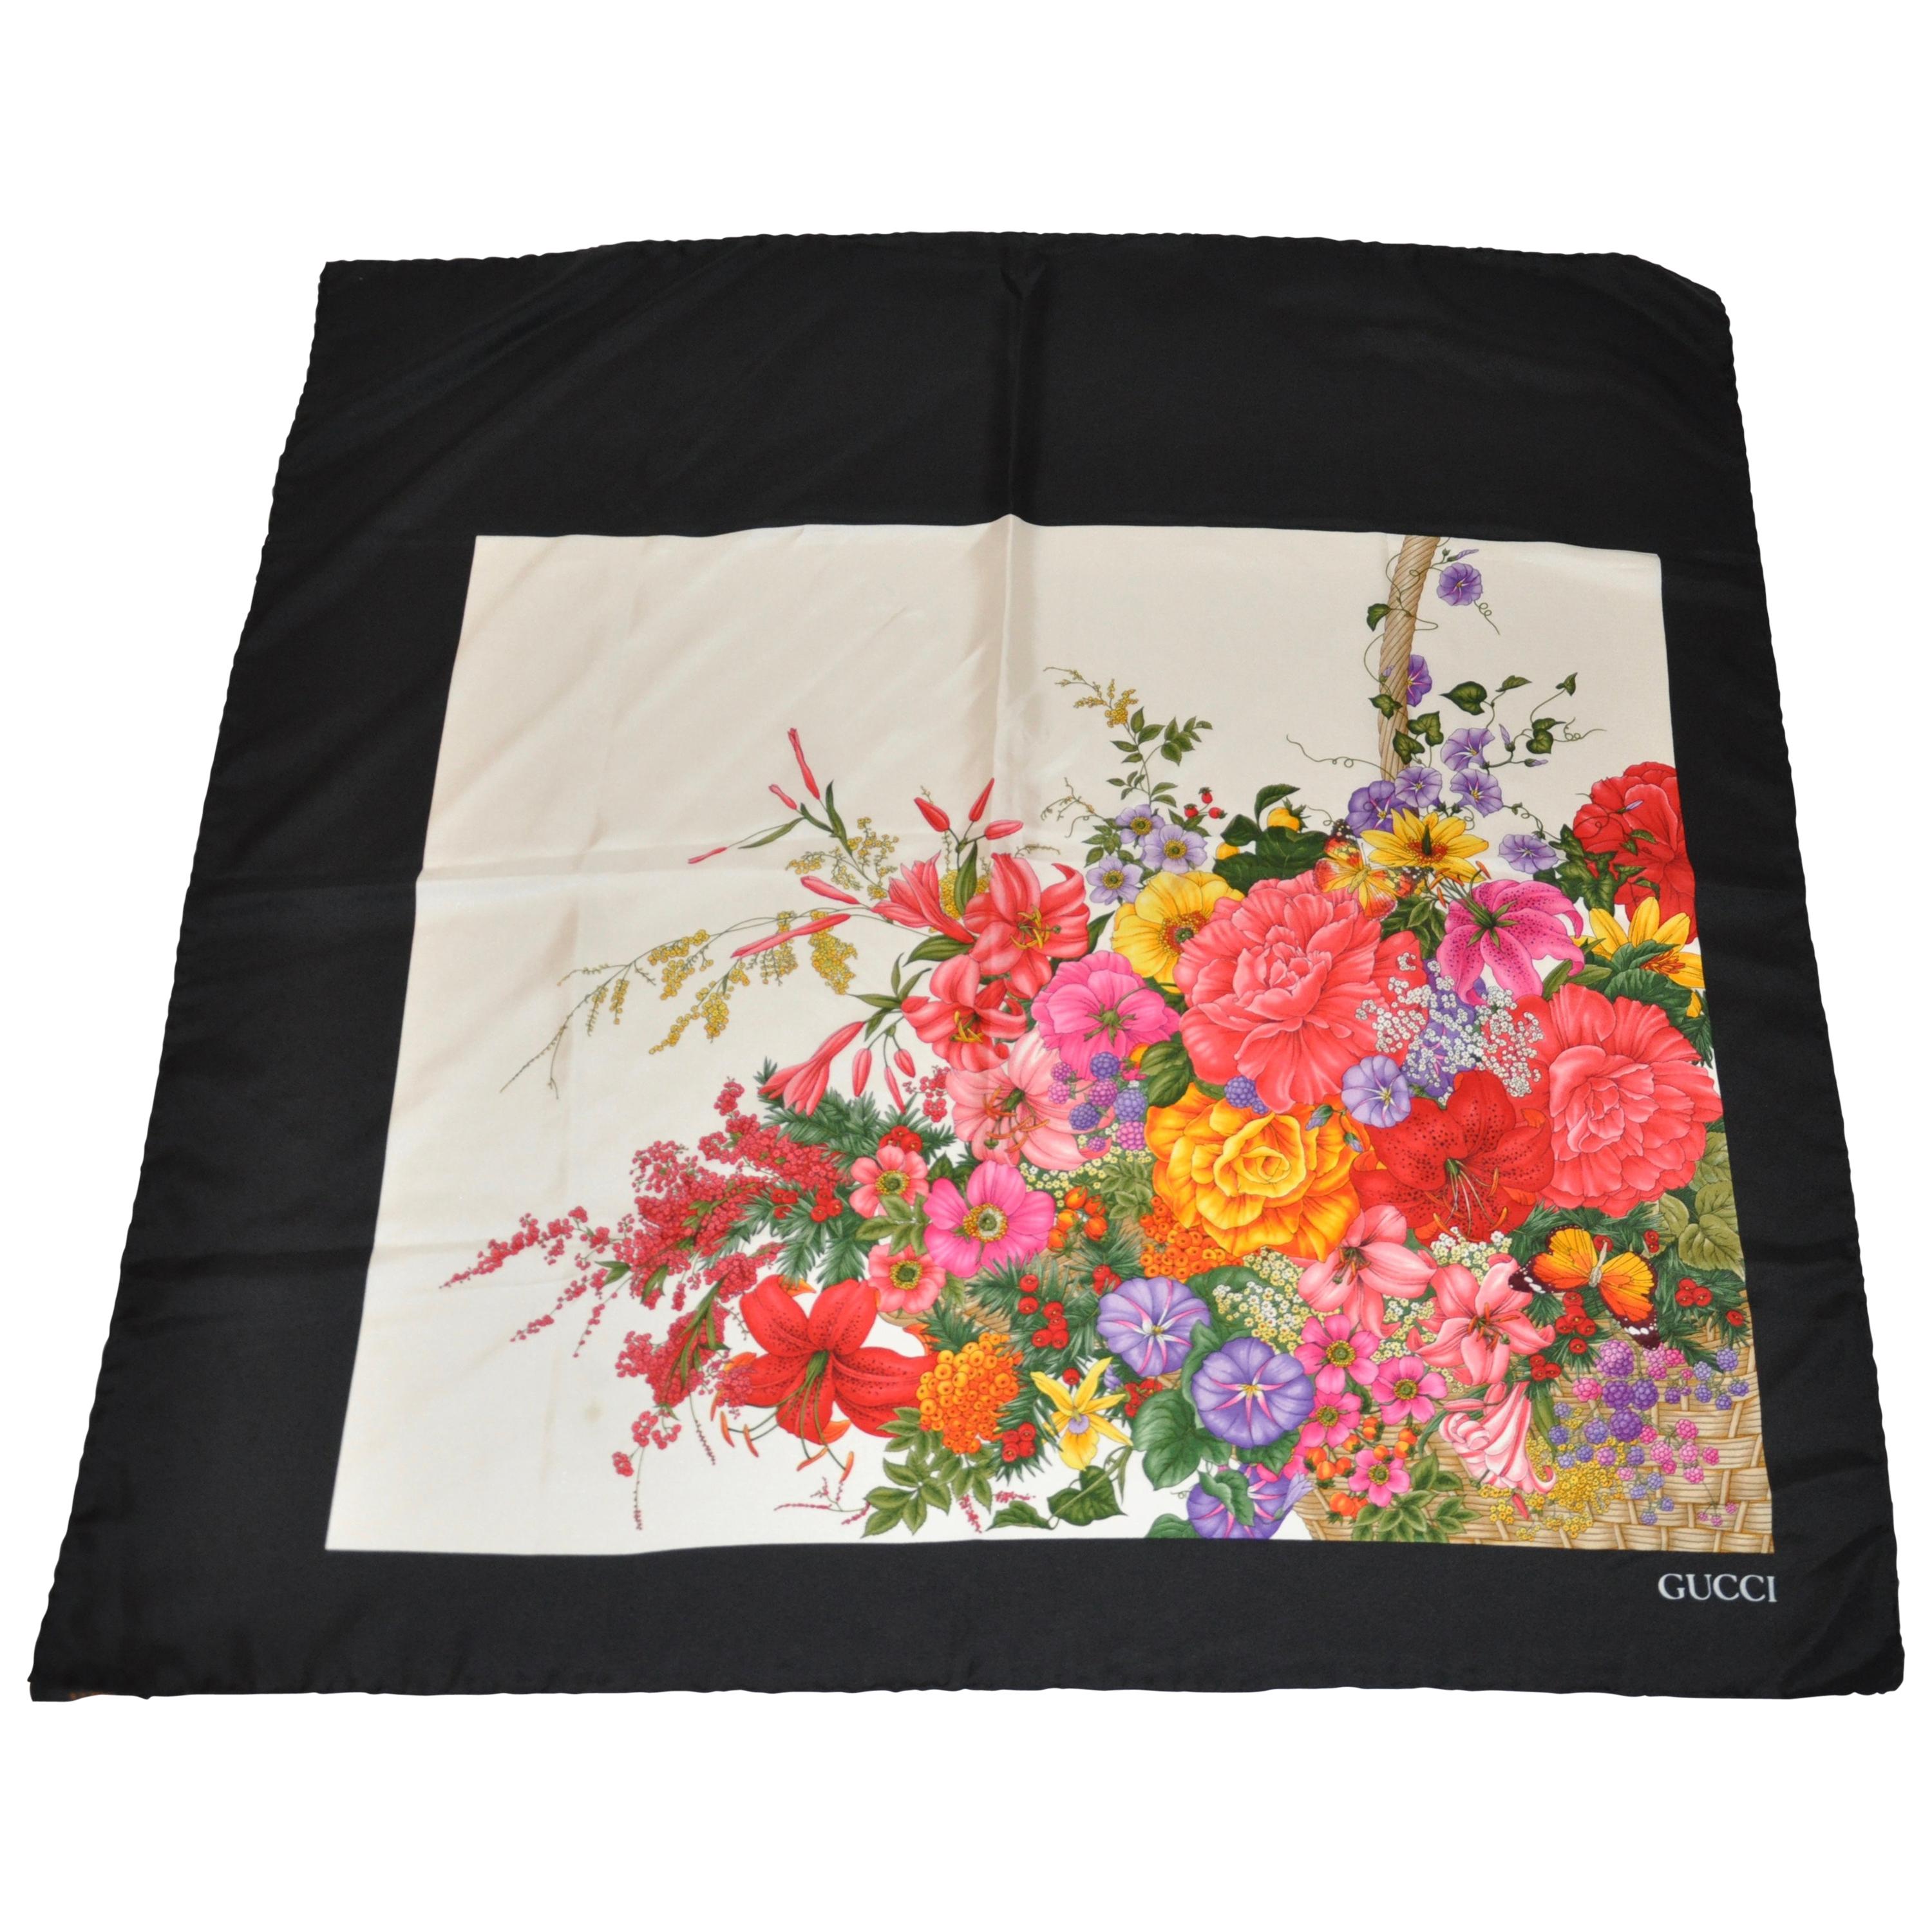 Gucci Iconic Signature Multi Color "Spring Florals" With Black Silk Scarf